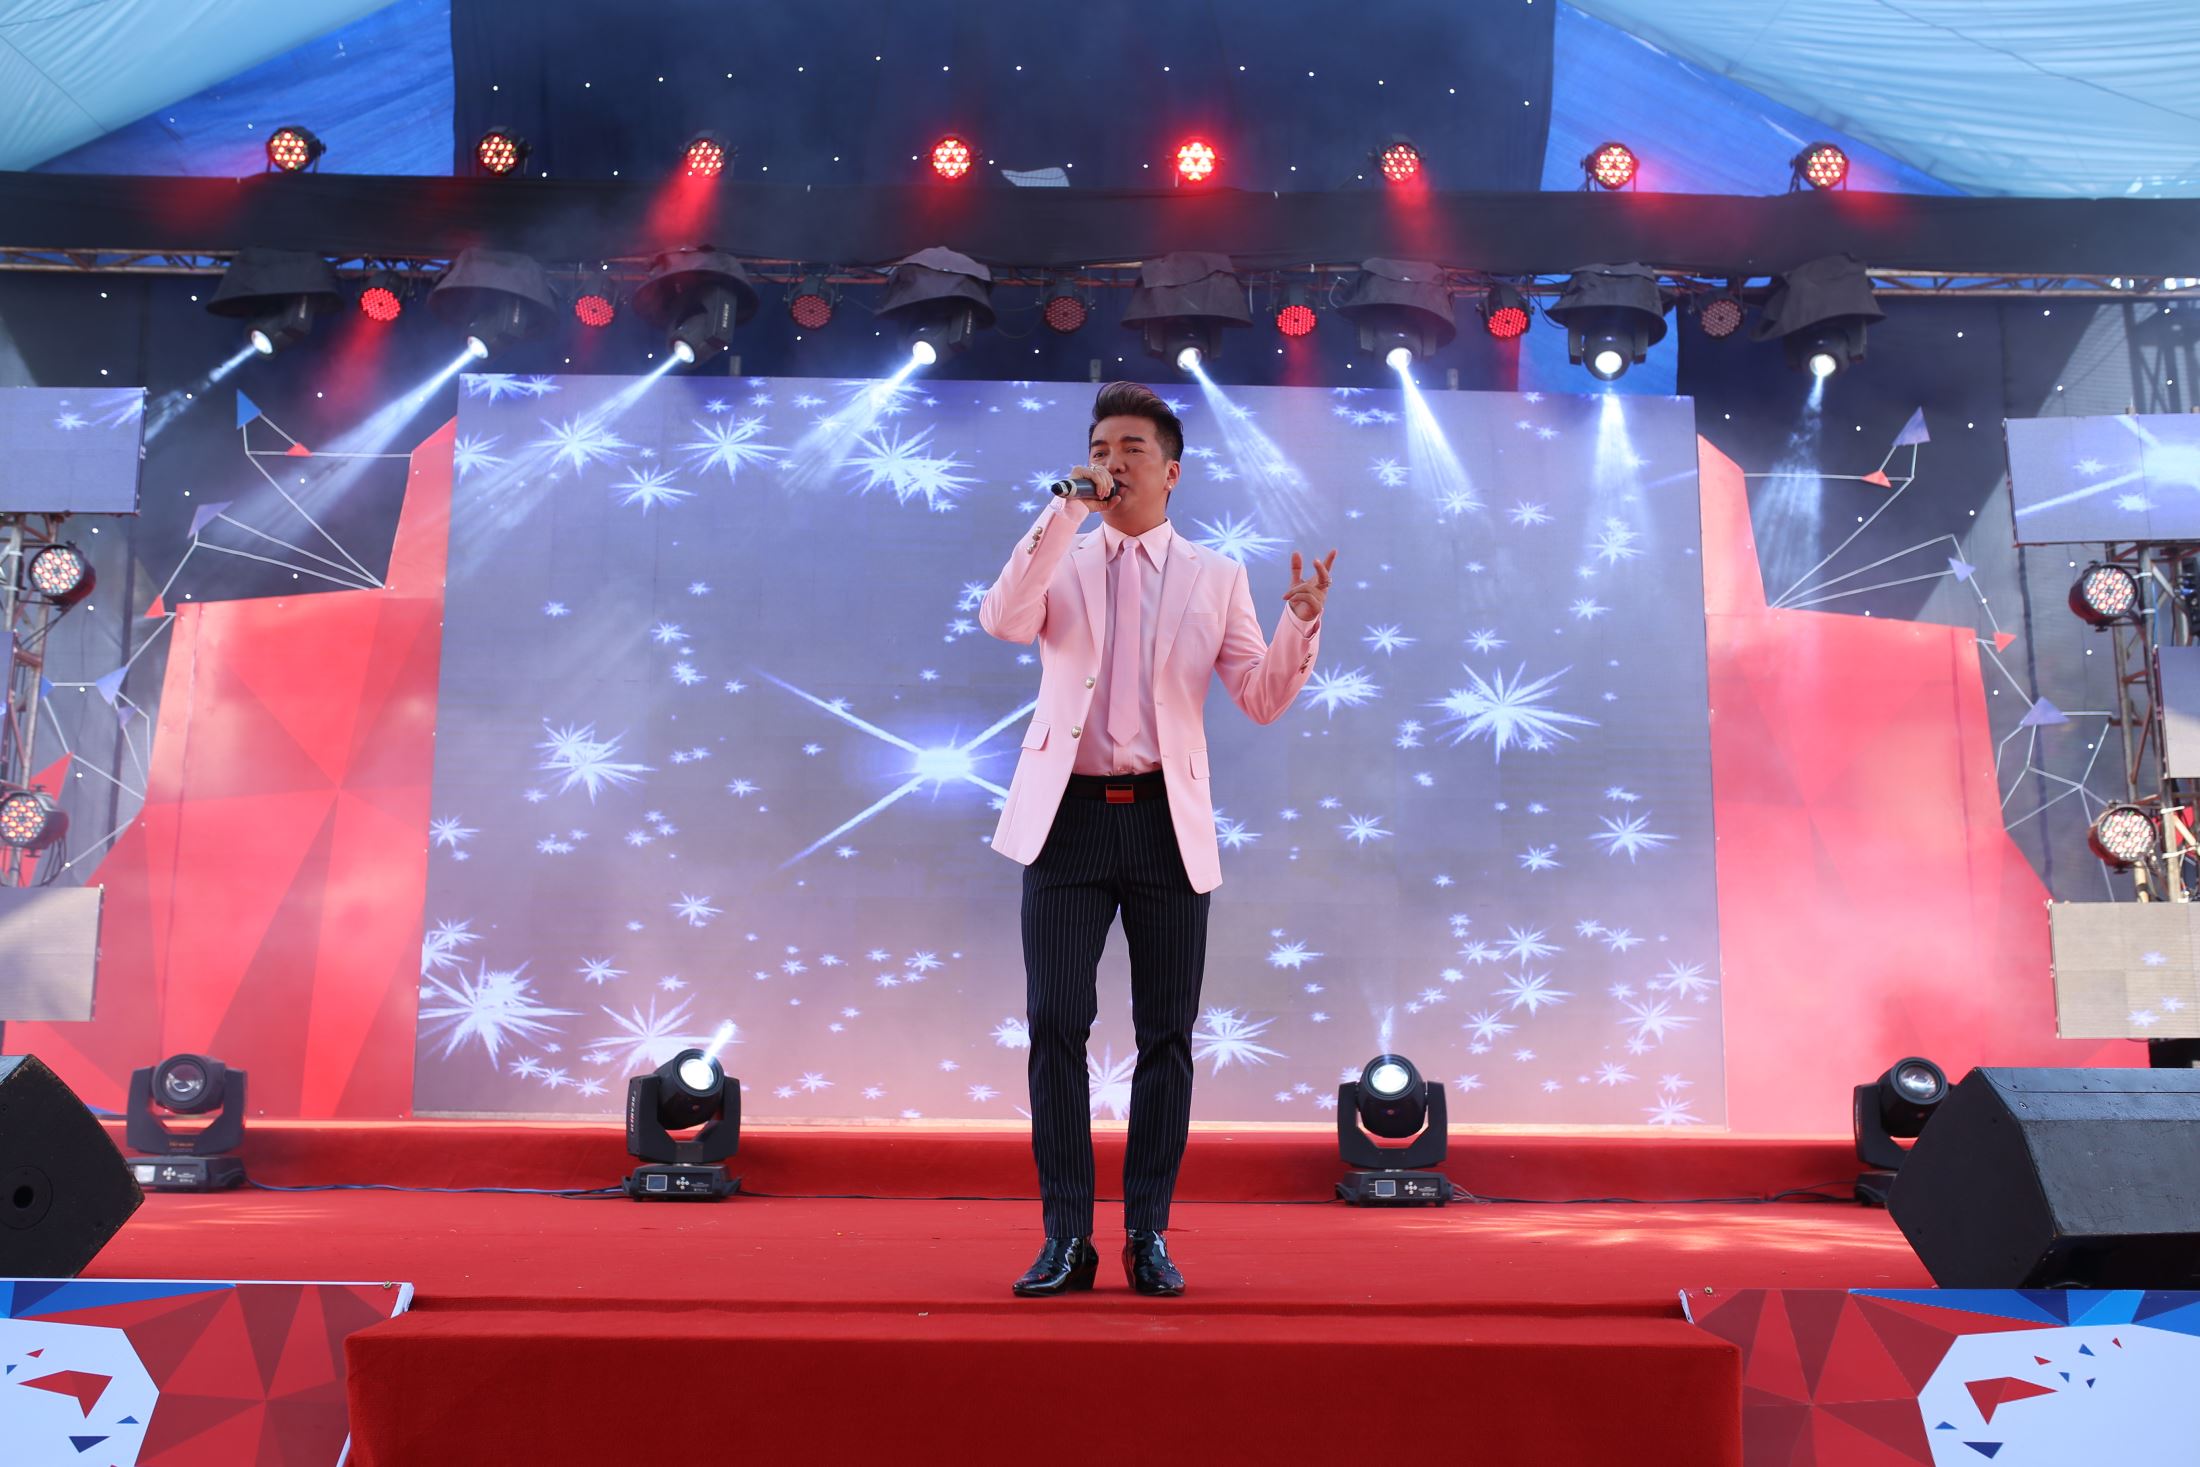 Mr. Dam Vinh Hung – the king of V-pop sings with all his heart for audience in the central